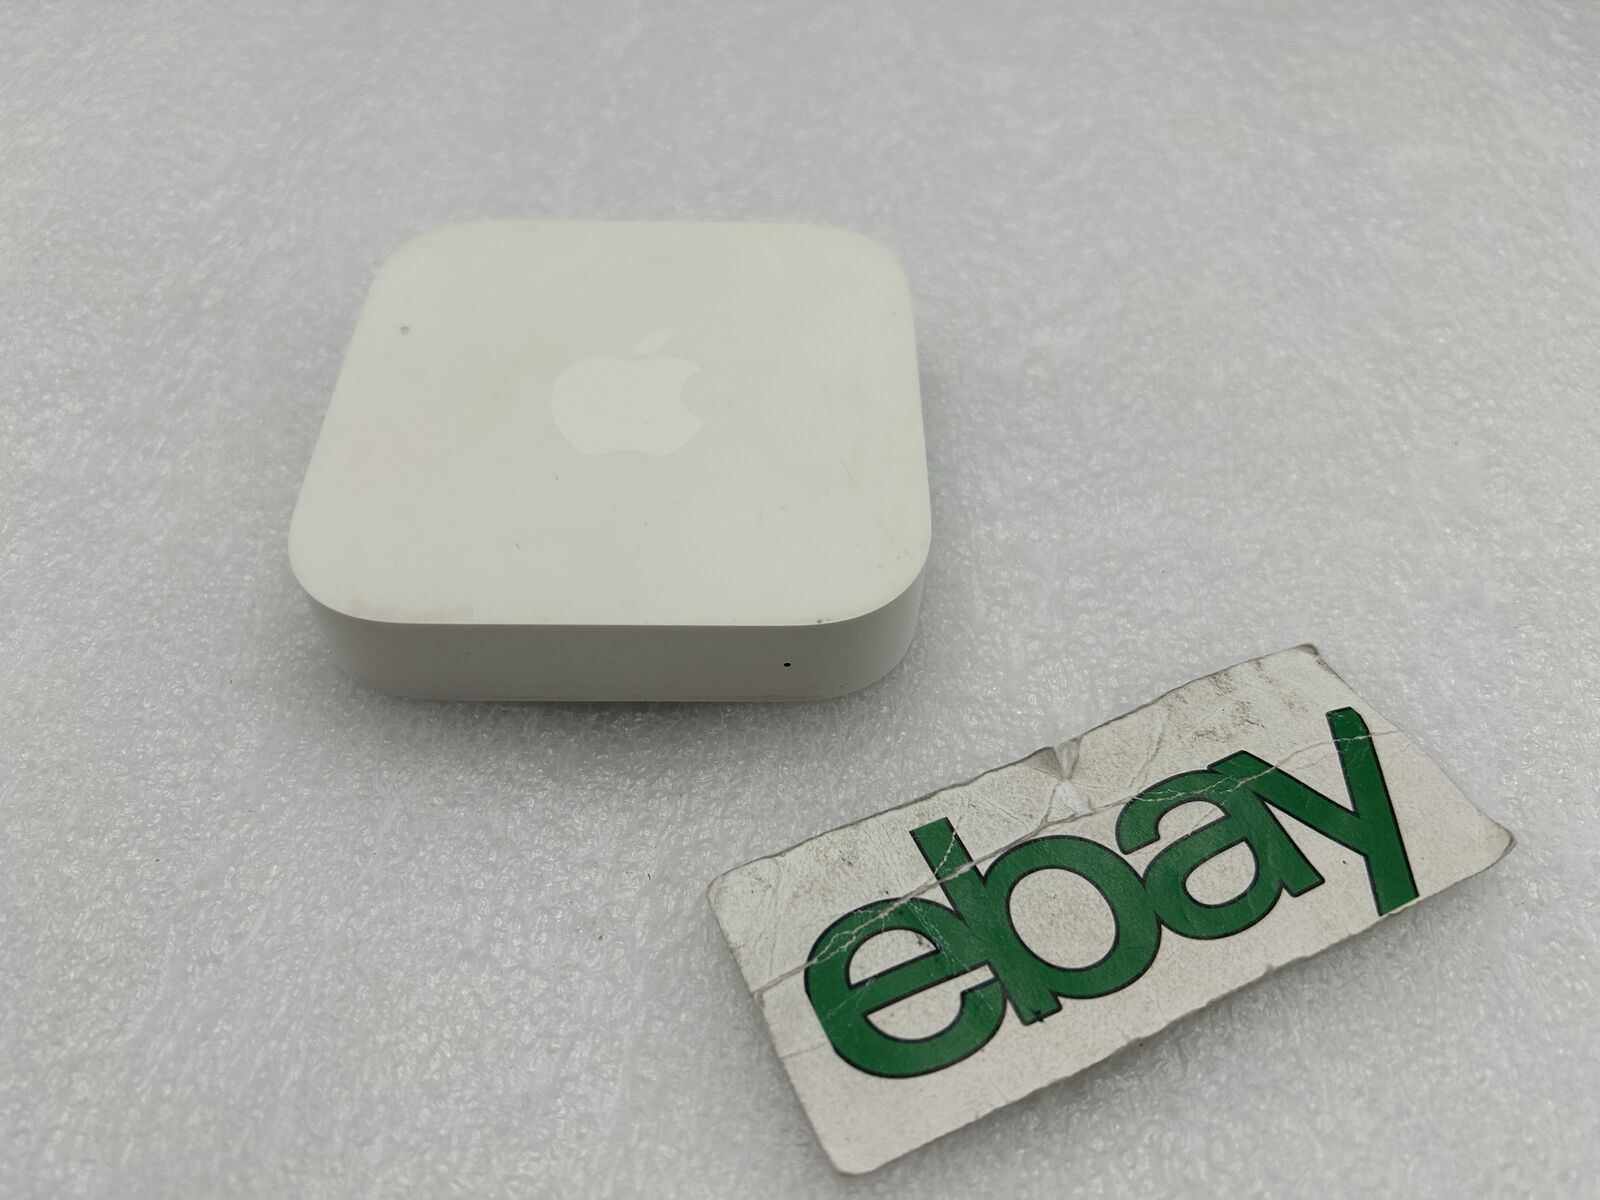 Apple AirPort Express Base Station Wireless Router 2nd Gen - Model A1392